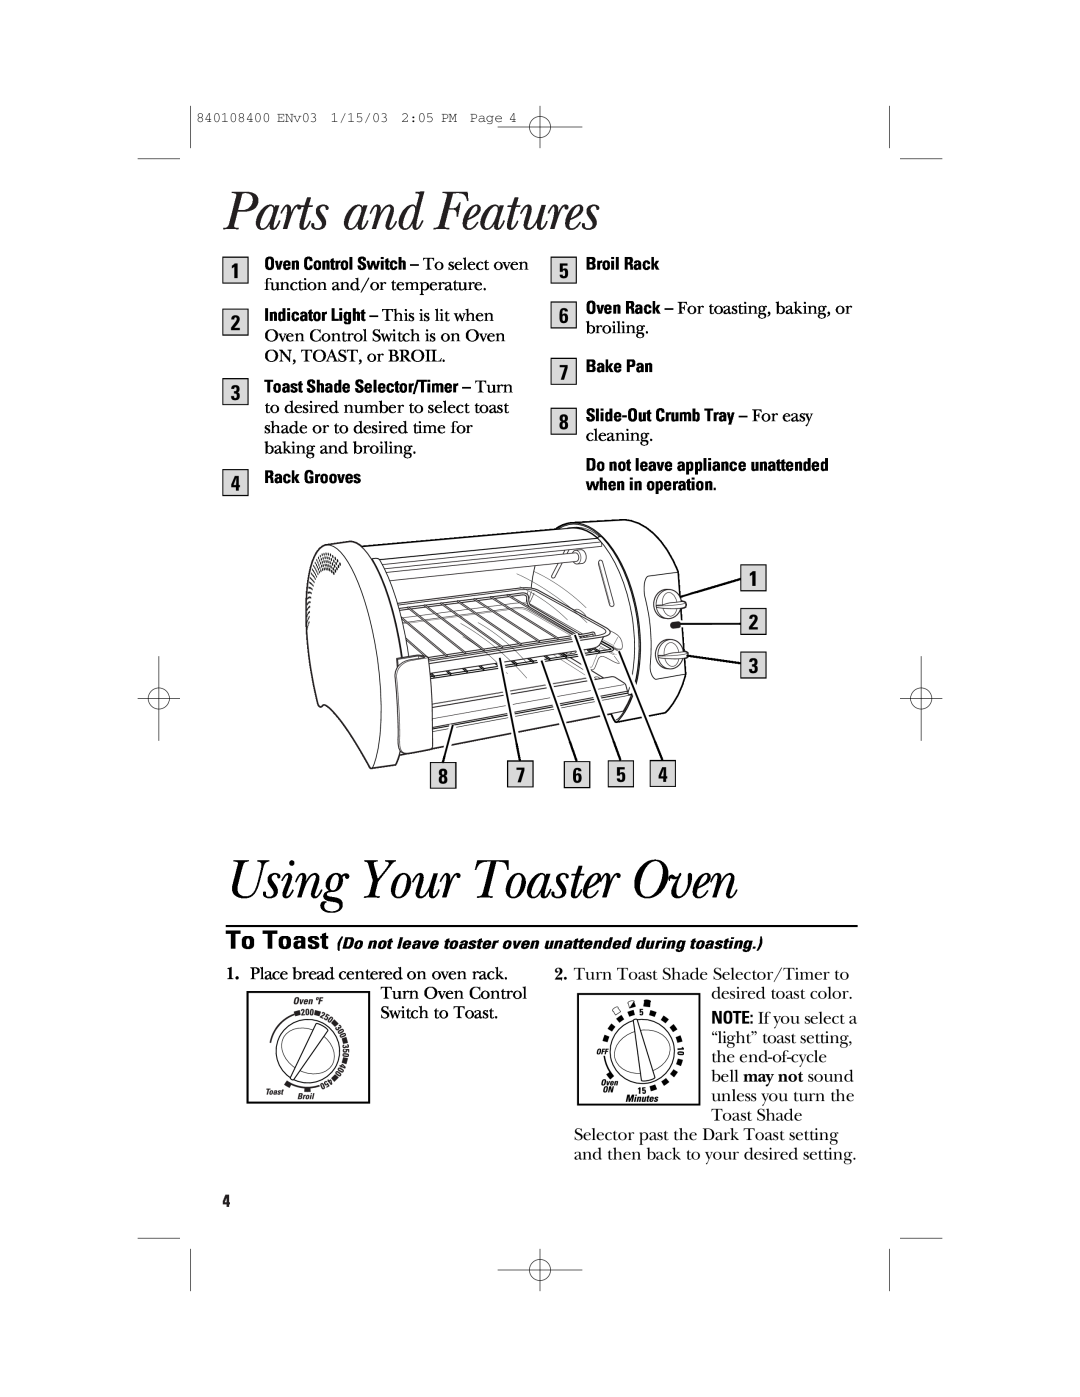 GE 840108400, 168955 manual Parts and Features, Using Your Toaster Oven, Broil Rack, Rack Grooves, Bake Pan 